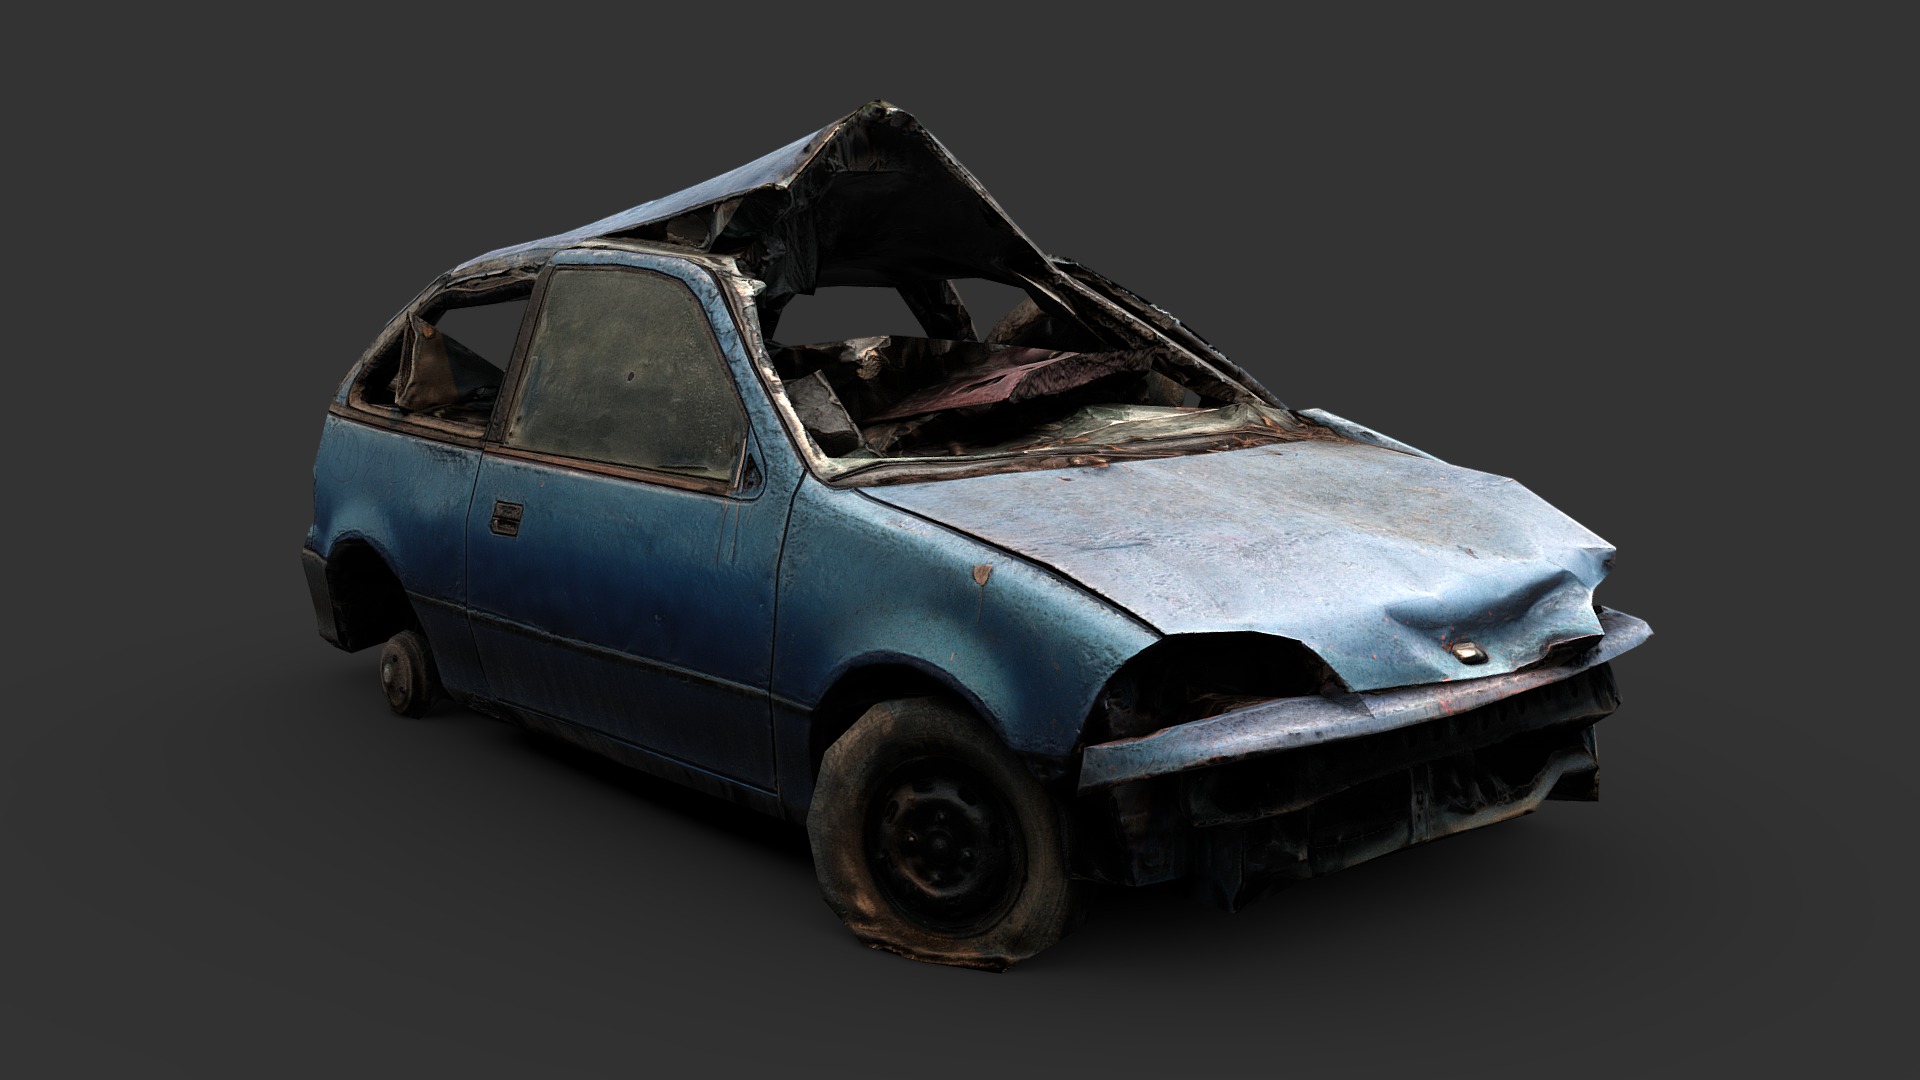 3D model Compact Wreck - This is a 3D model of the Compact Wreck. The 3D model is about a blue car with a dent in the front.